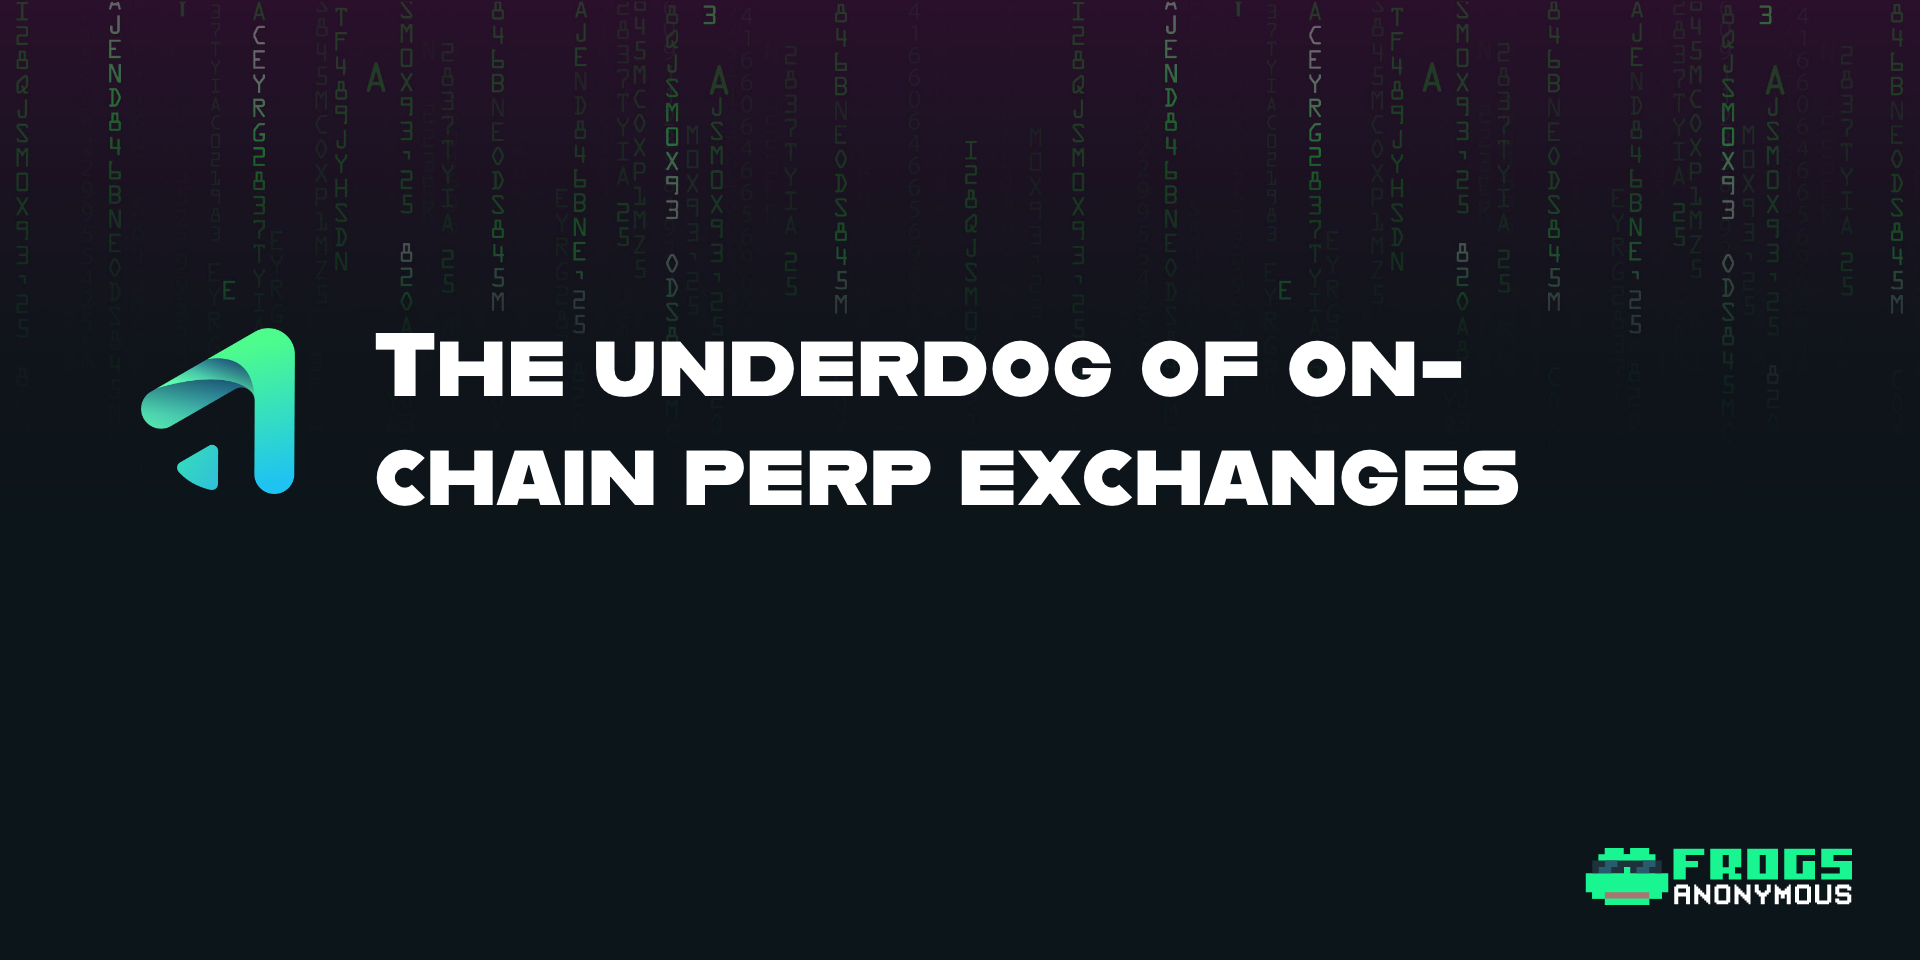 Gains Network: The Underdog of On-Chain Perp Exchanges